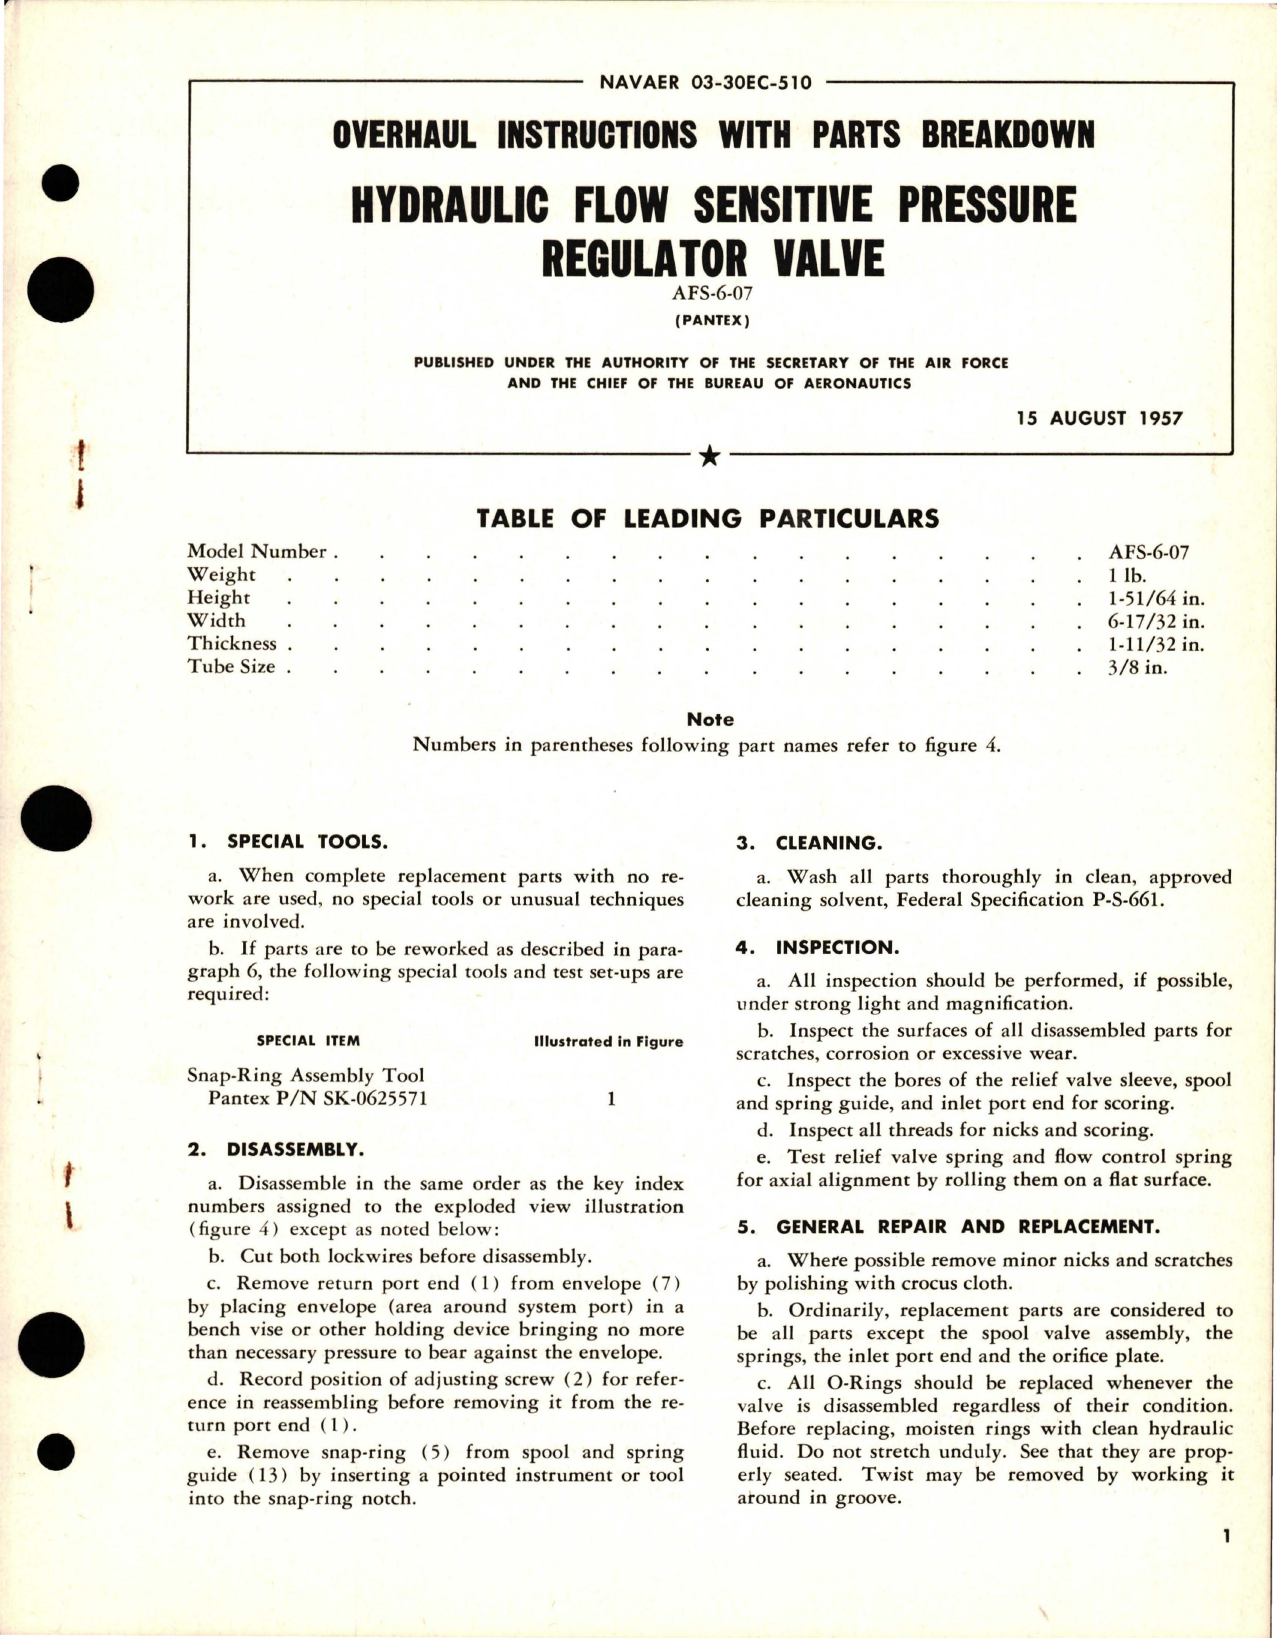 Sample page 1 from AirCorps Library document: Overhaul Instructions with Parts for Hydraulic Flow Sensitive Pressure Regulator Valve - AFS-6-07